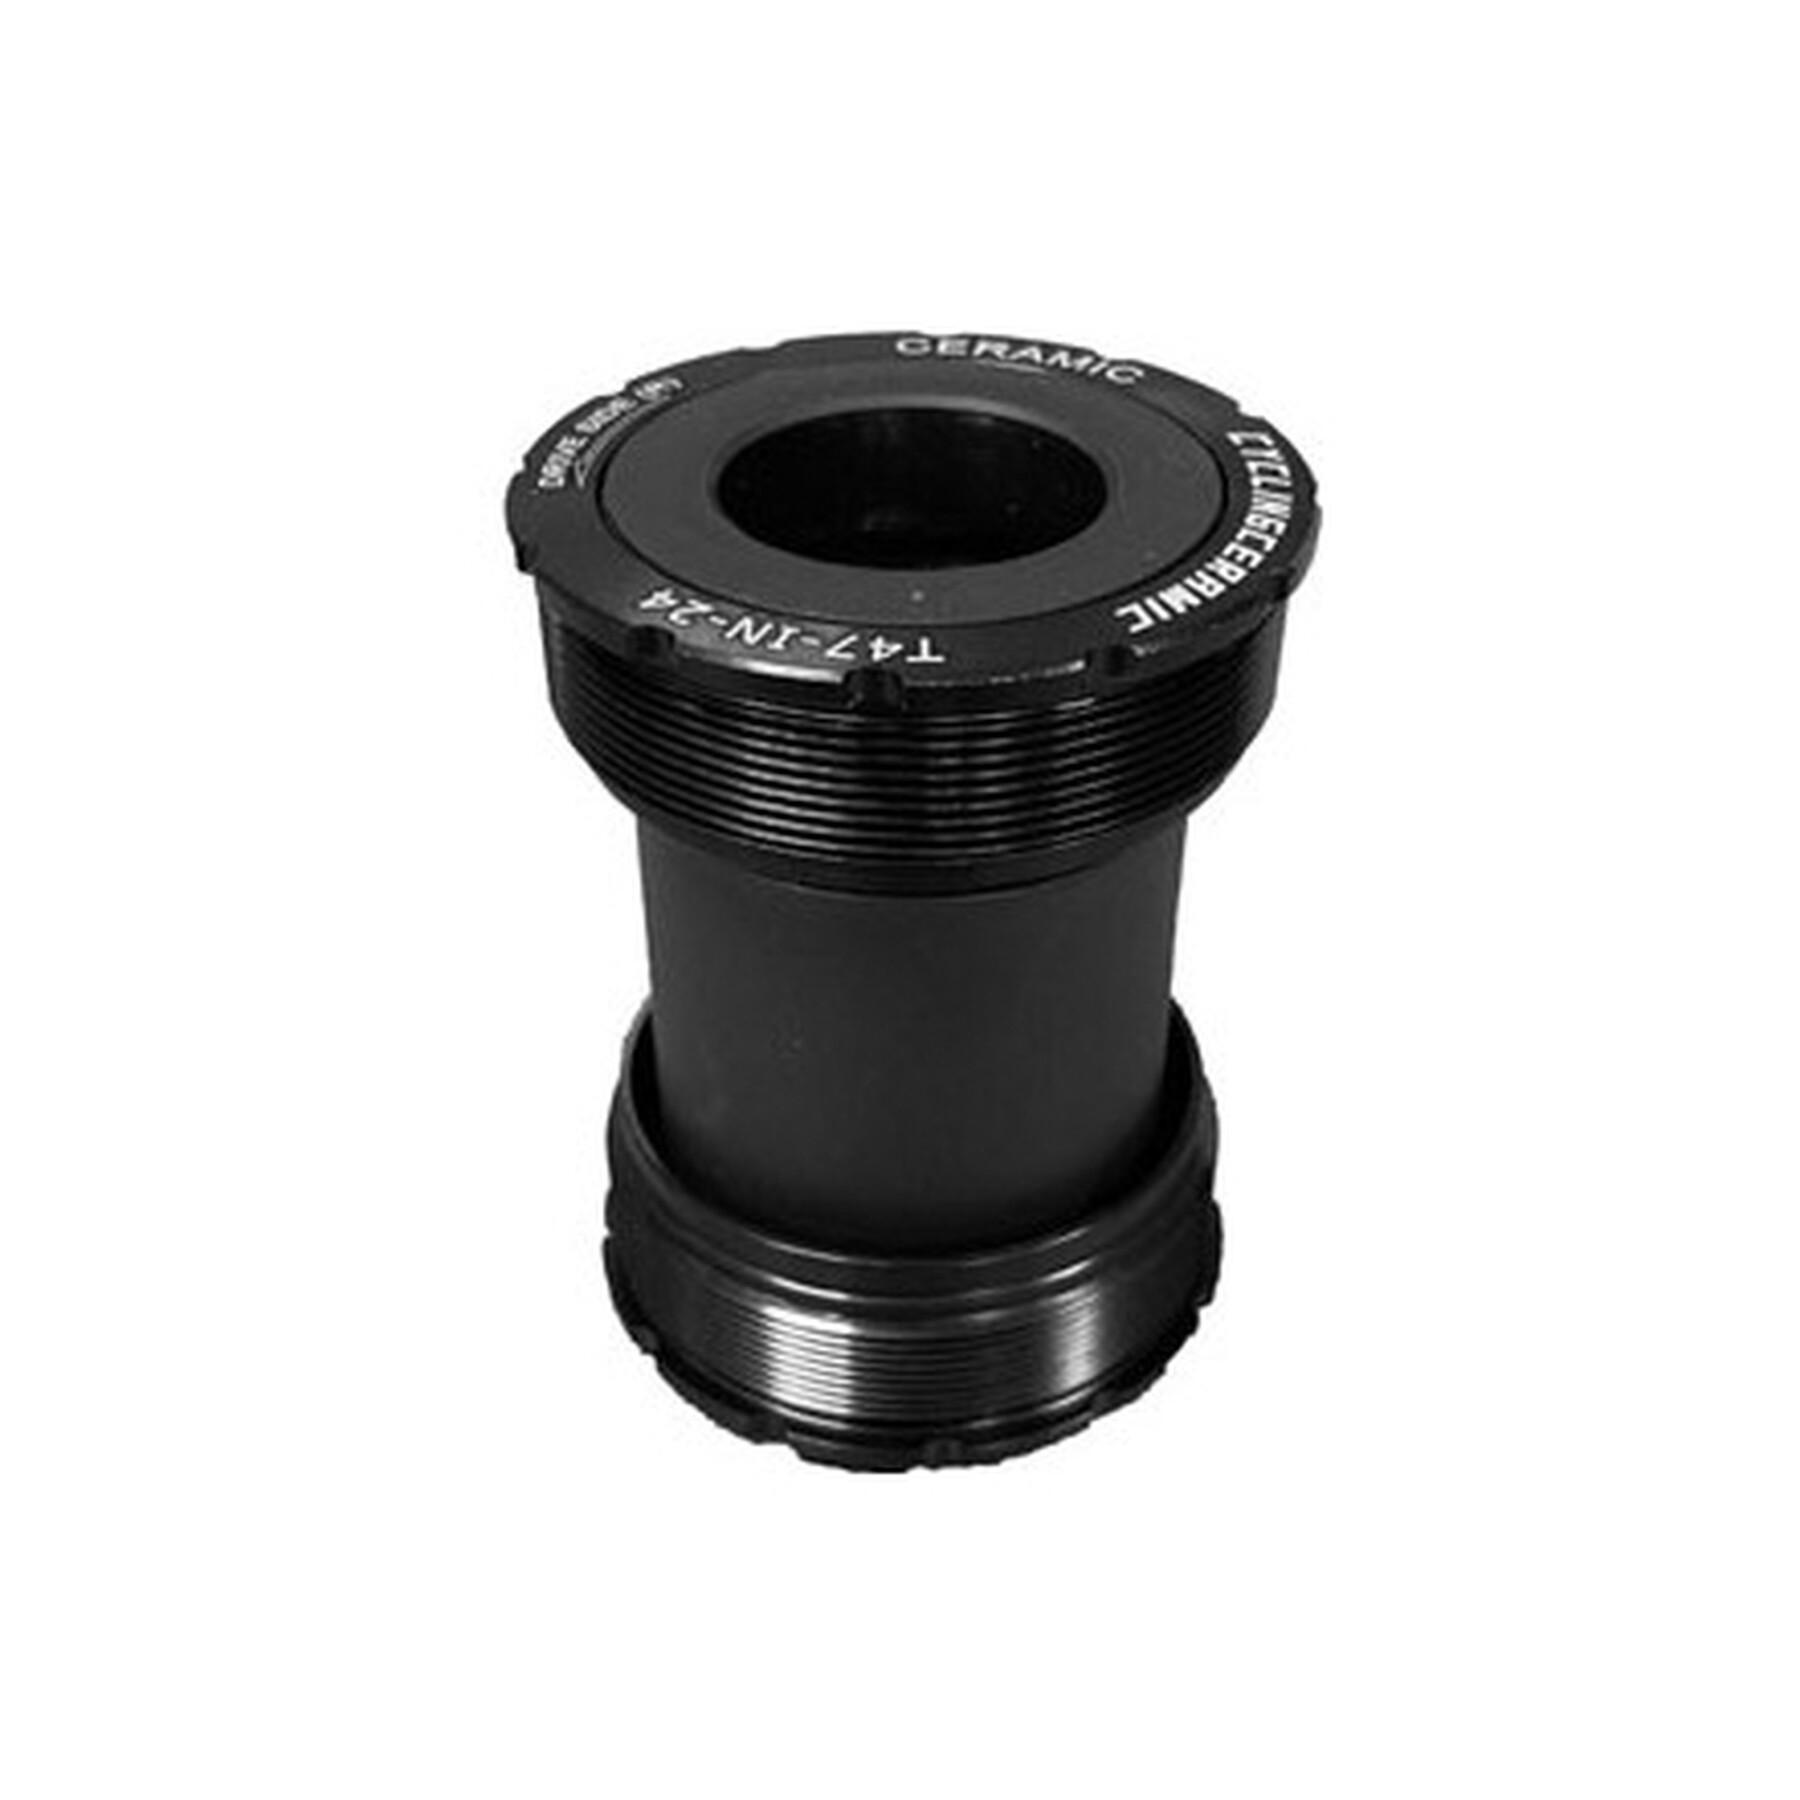 Bottom bracket Cycling Ceramic t47 - in cup shimano